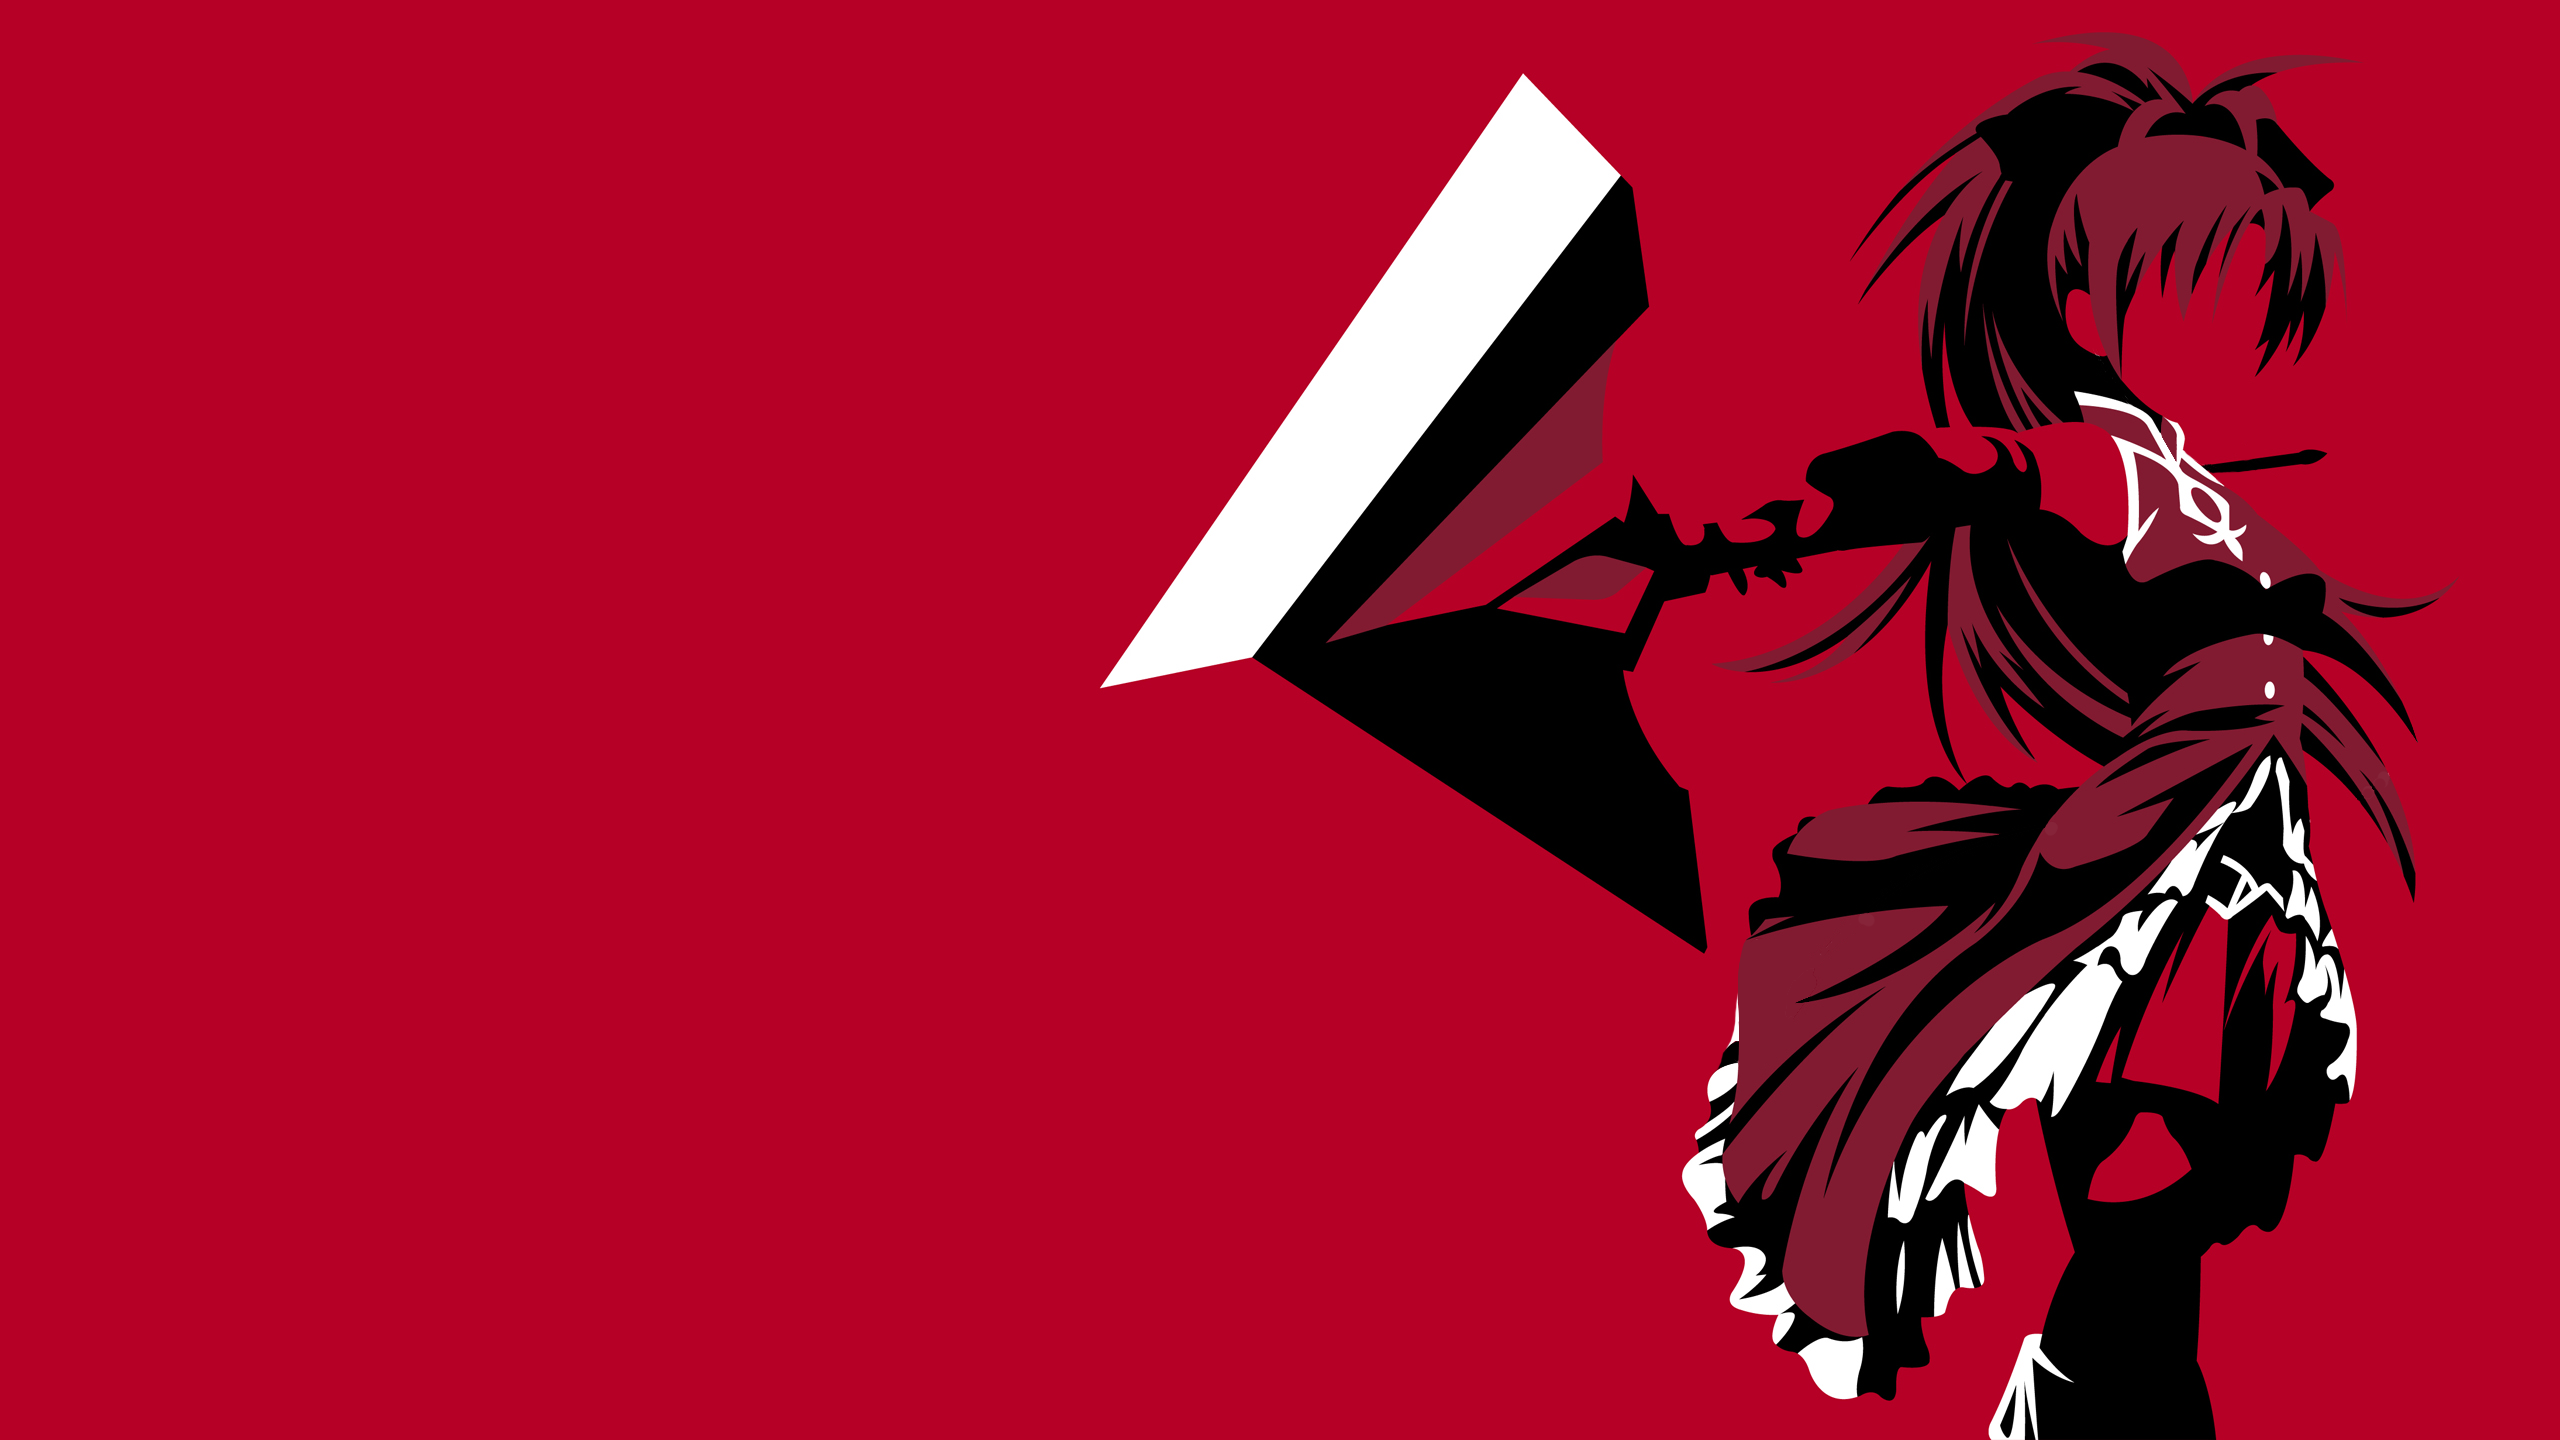 Red Anime Wallpaper 2560X1440 - 1522 anime wallpapers (1440p resolution